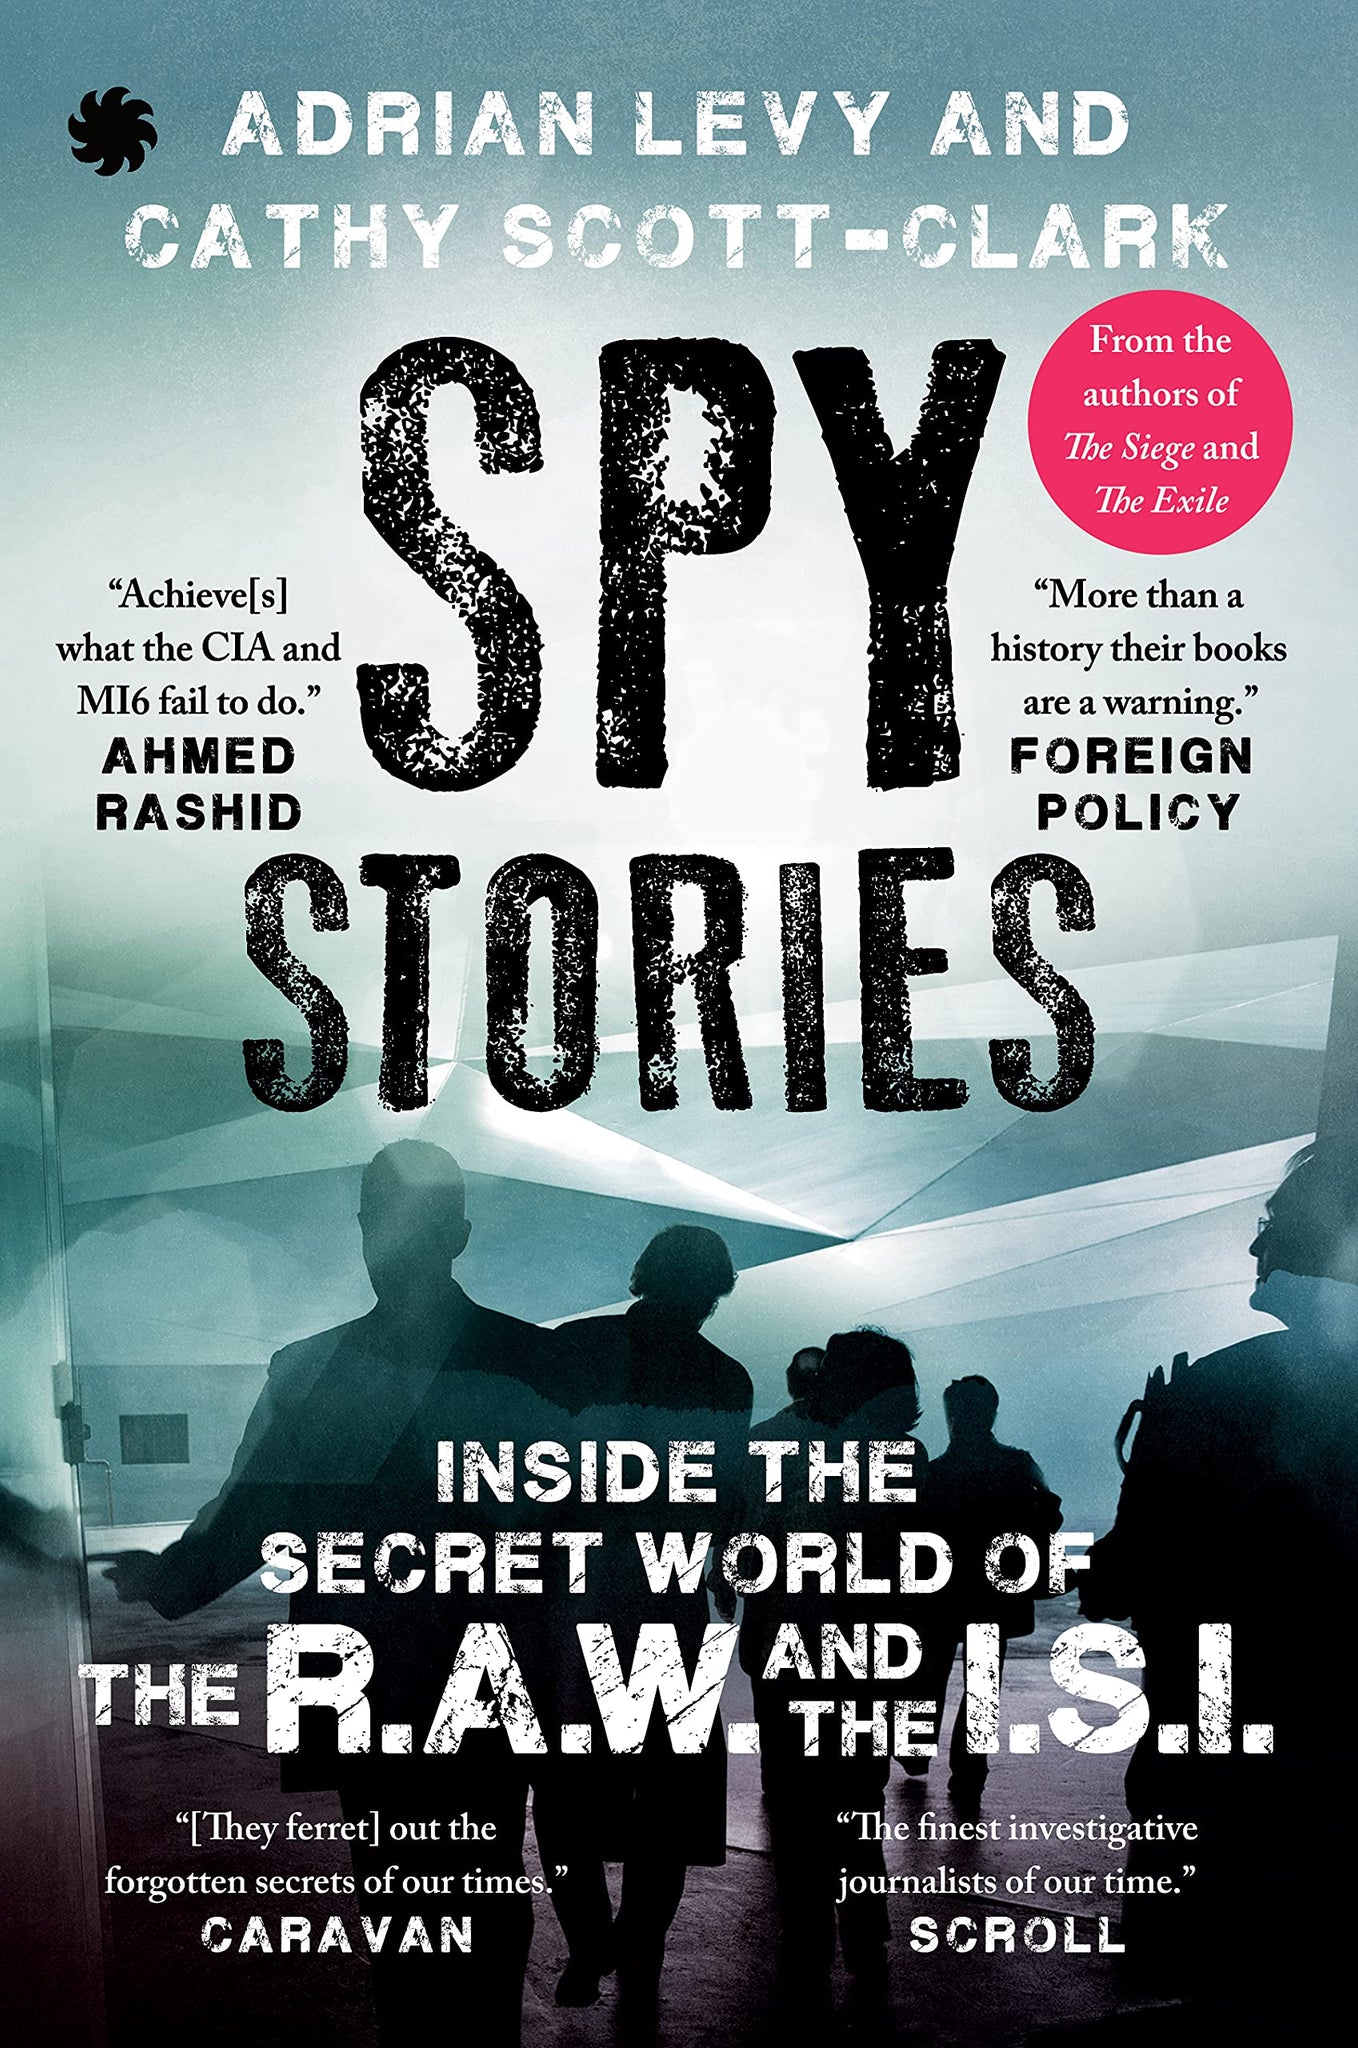 SPY STORIES : Inside the Secret World of the R.A.W. and the I.S.I. - Paperback